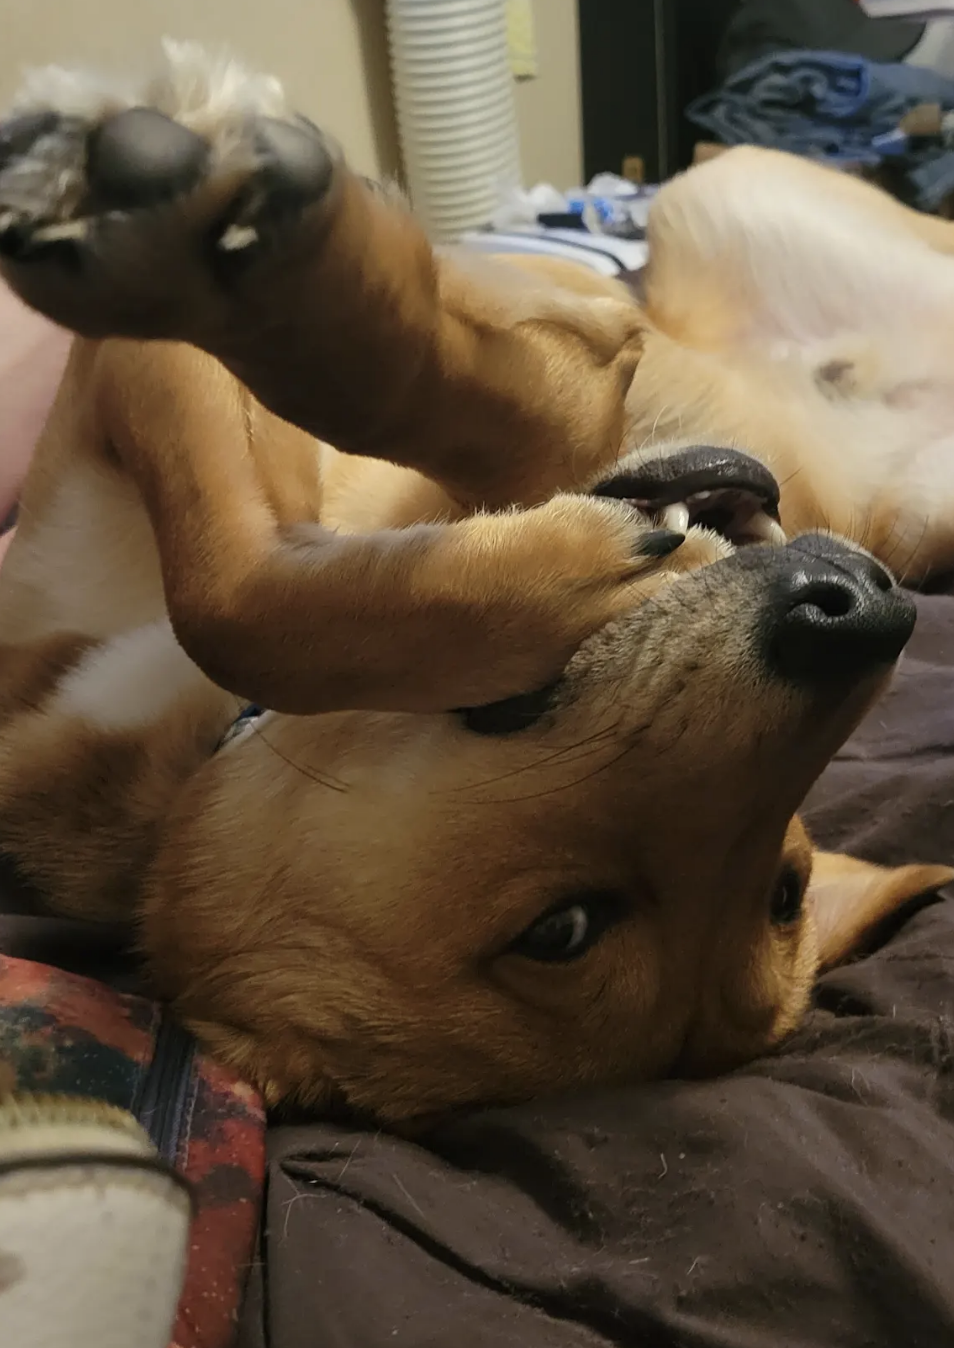 Dog lying on back playfully with paws up